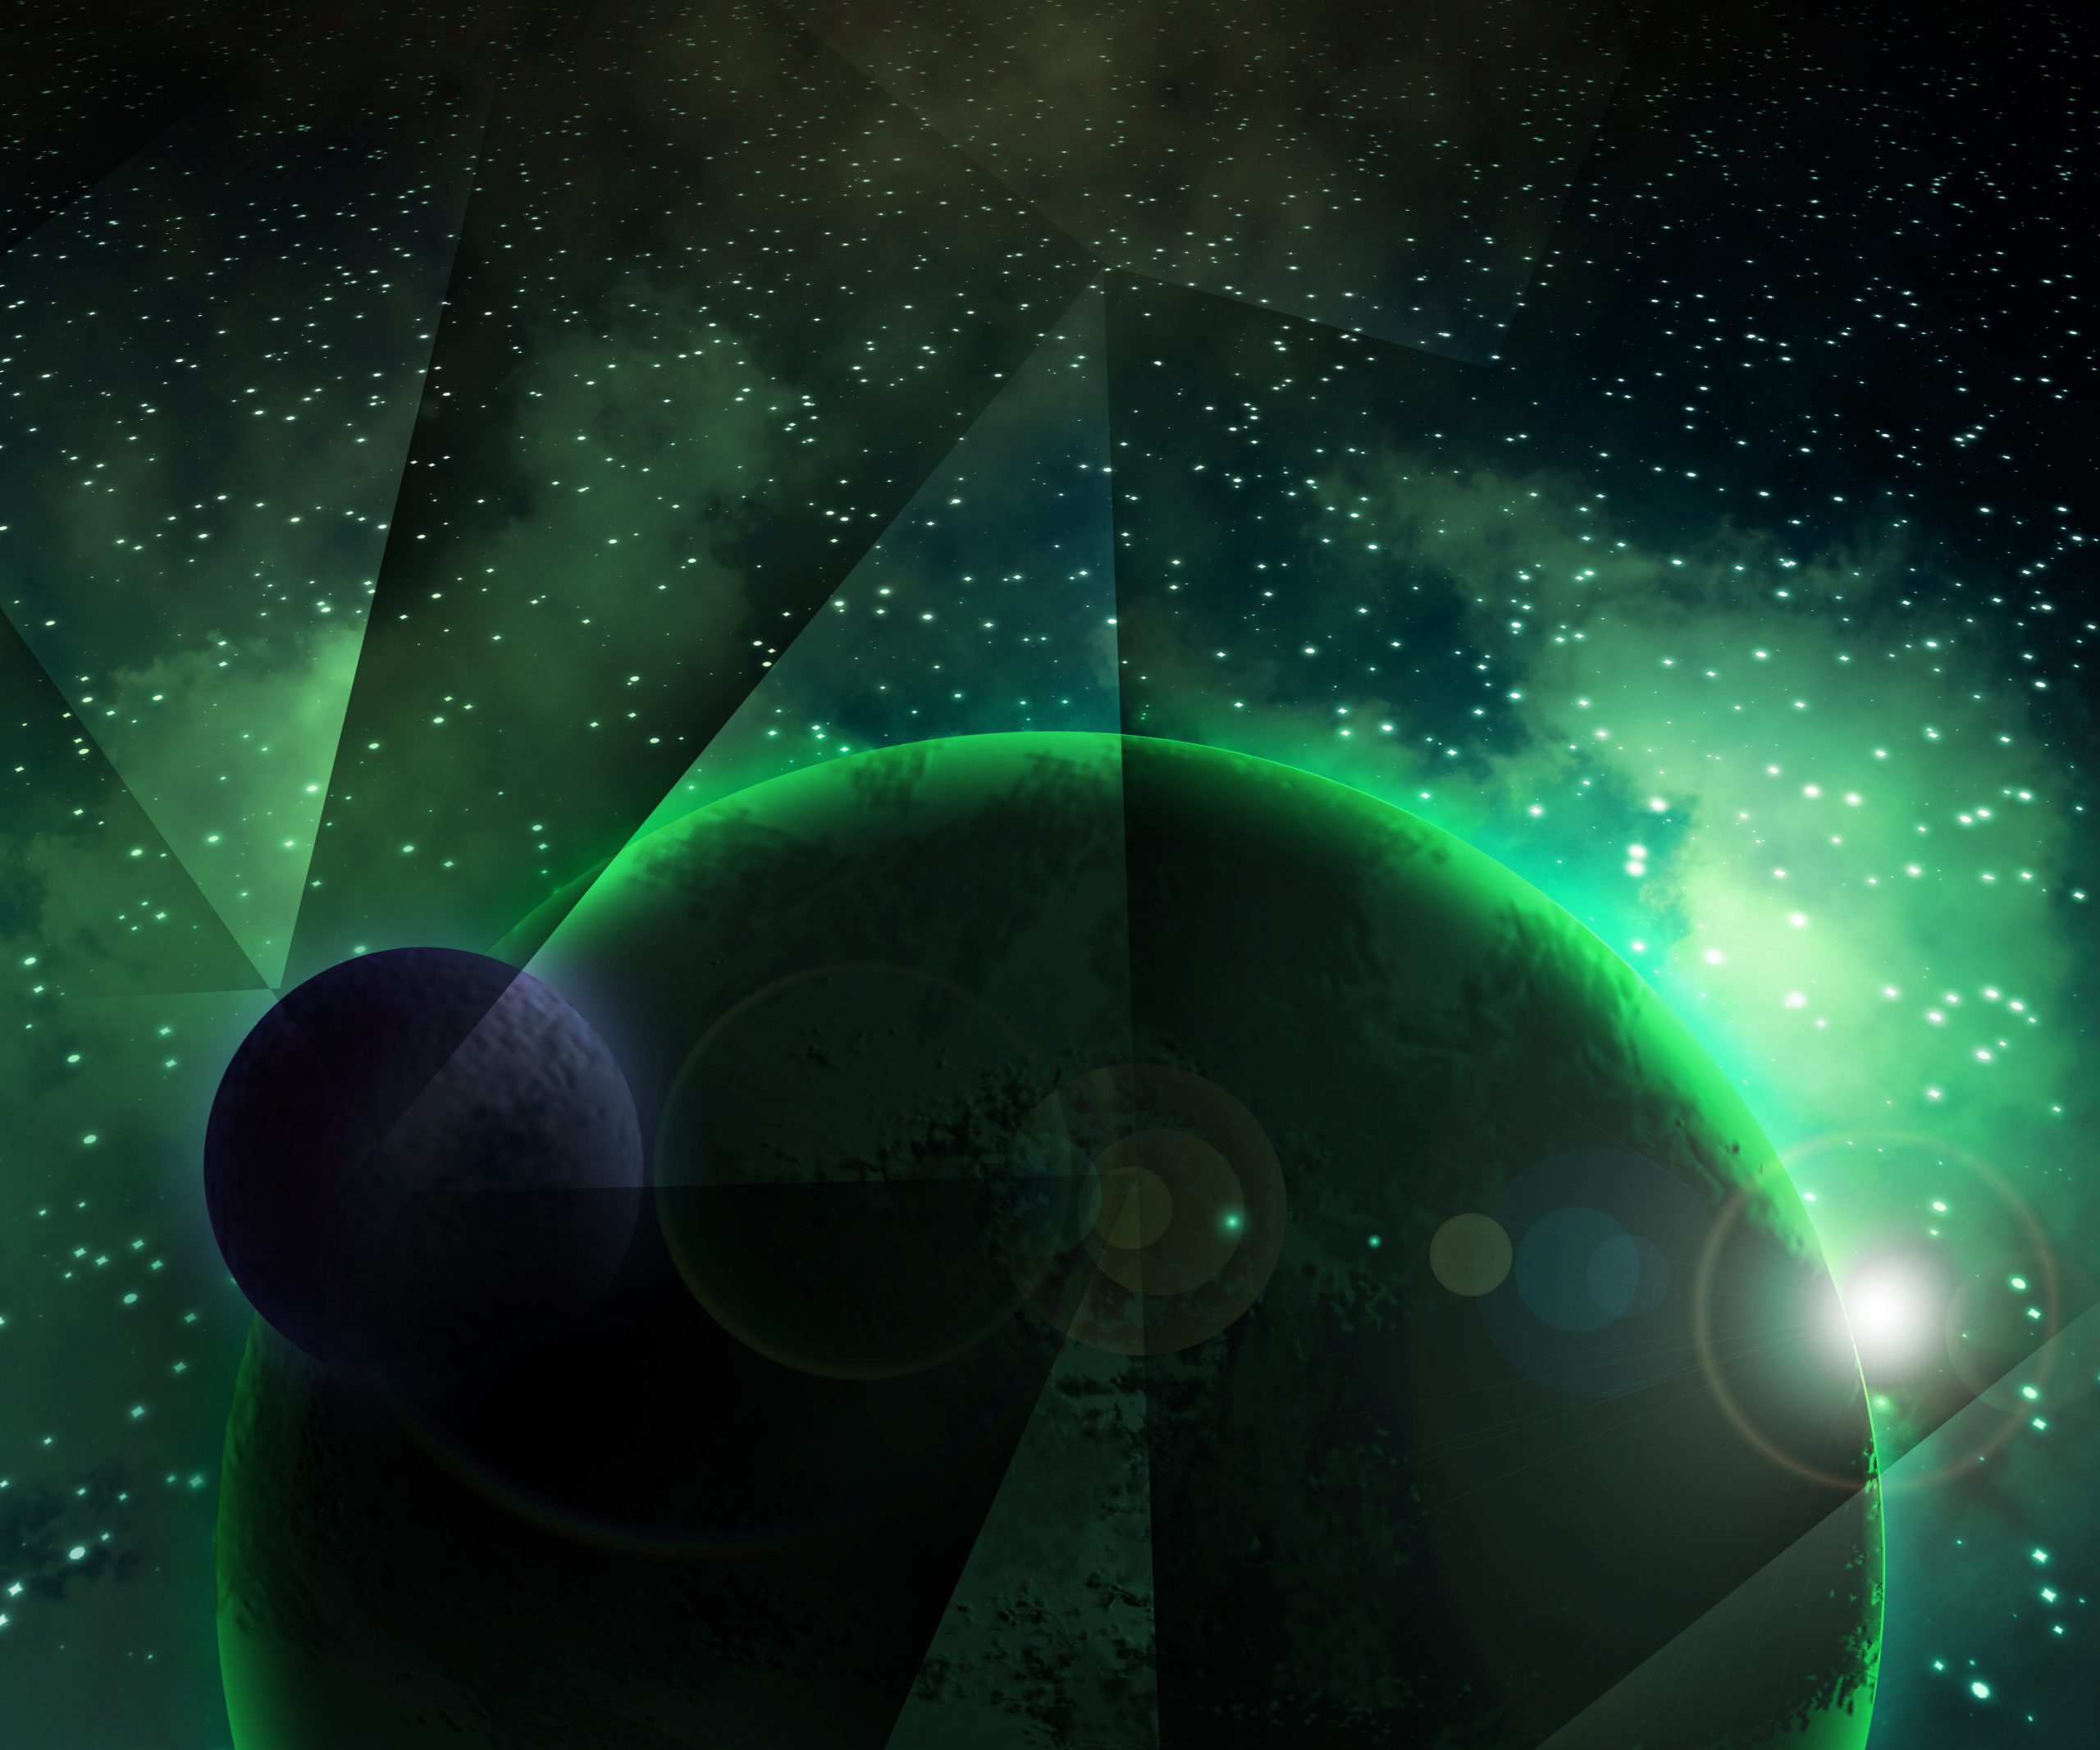 Two Green Planets Cosmic Background